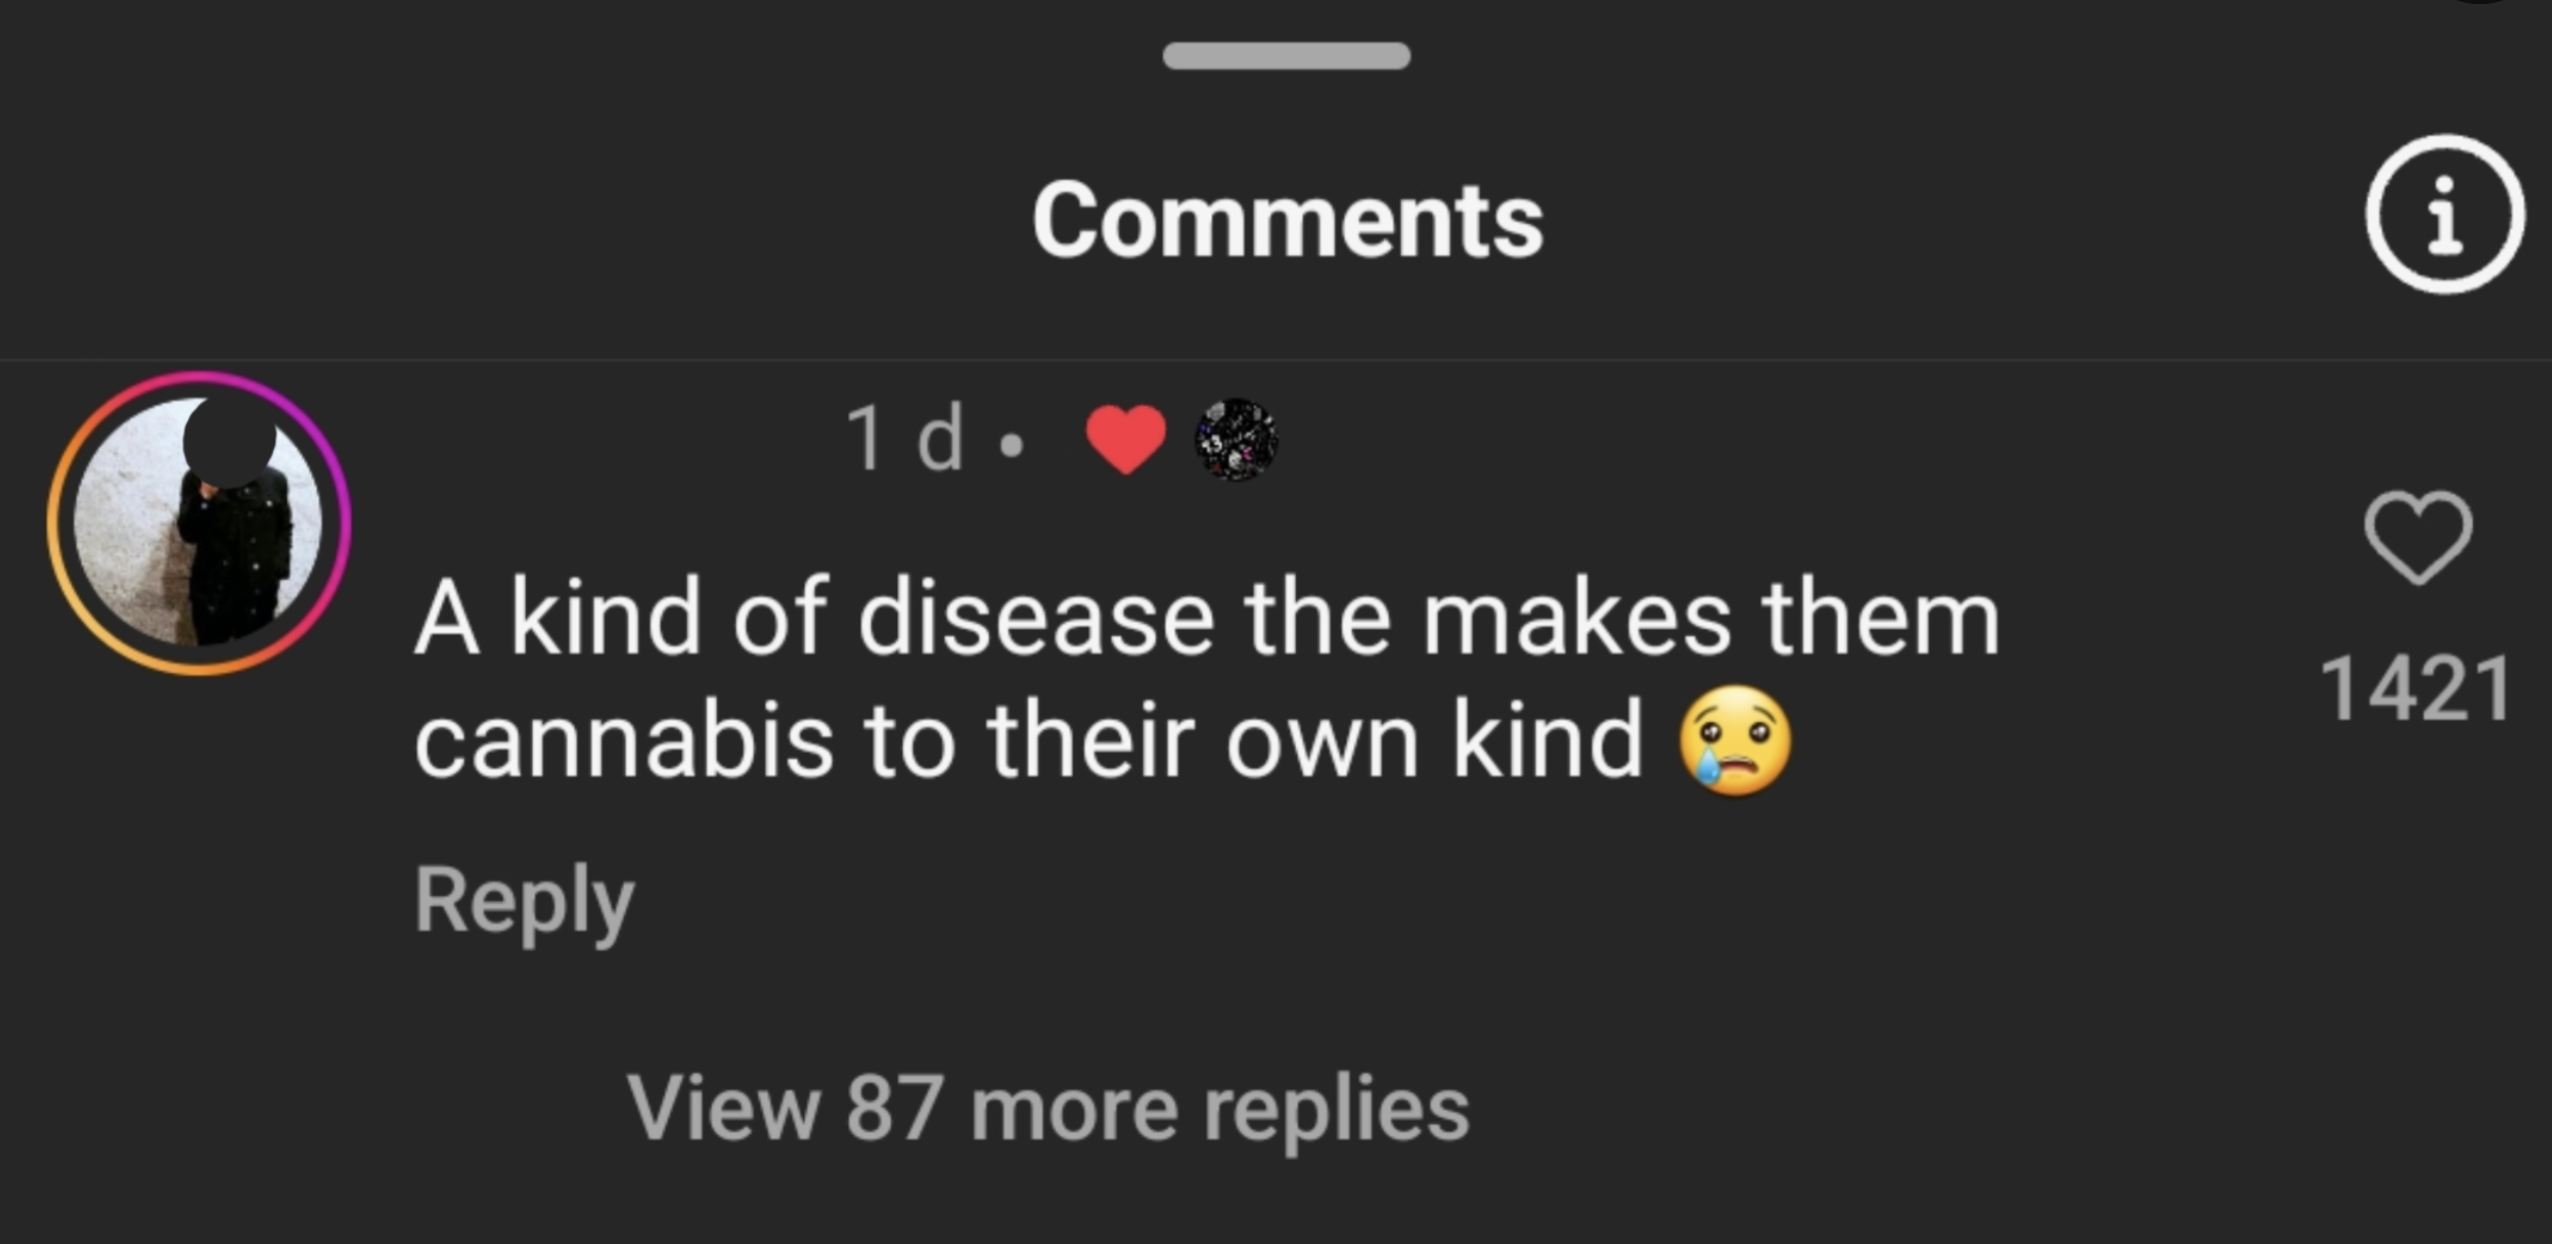 screenshot - 1 d. A kind of disease the makes them cannabis to their own kind View 87 more replies i 1421